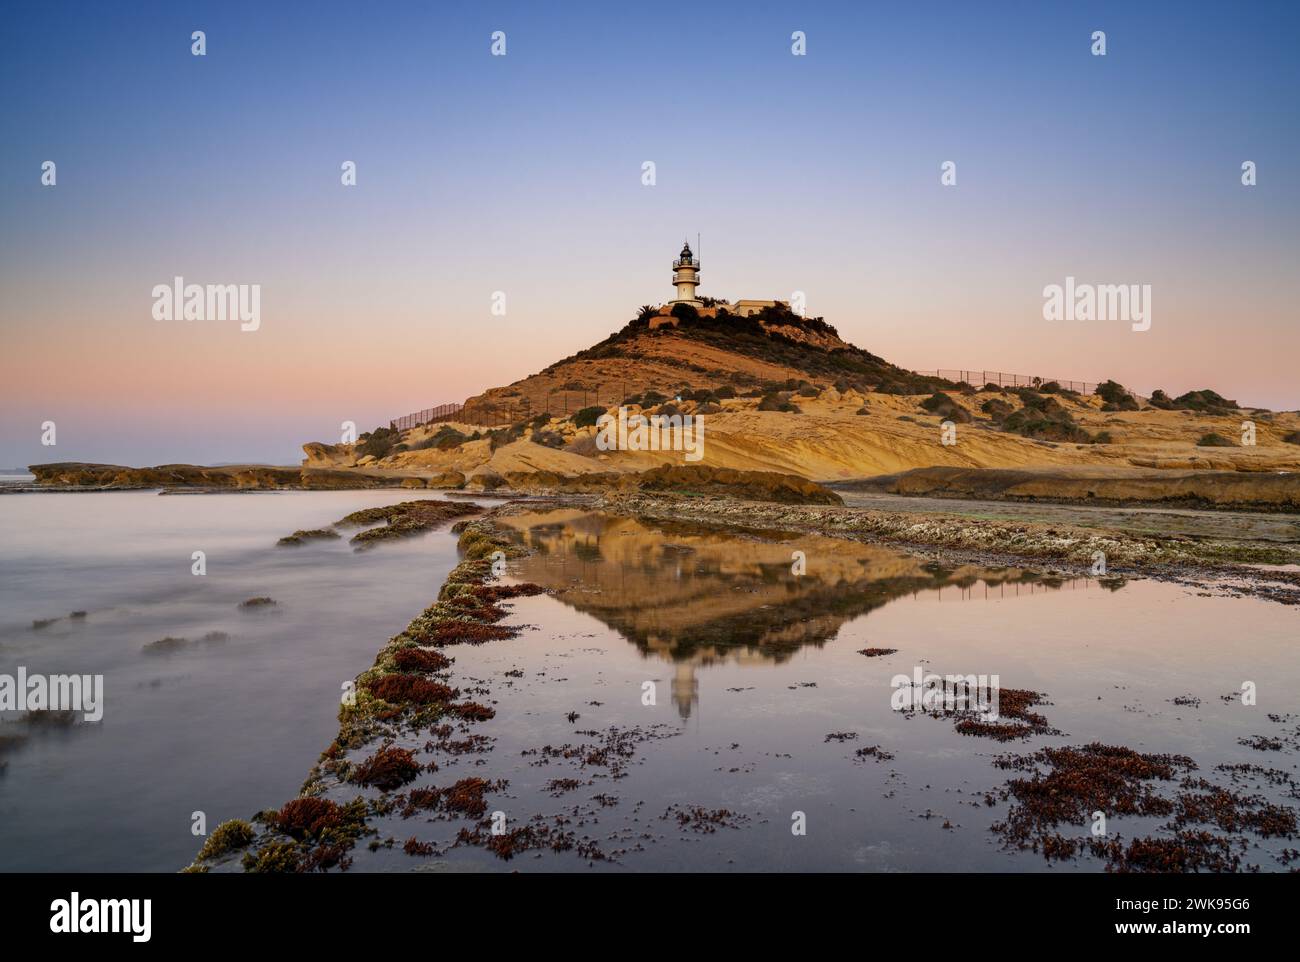 A view of the Cabo de la Huerta lighthouse at sunrise with reflections in tidal pools in the foreground Stock Photo